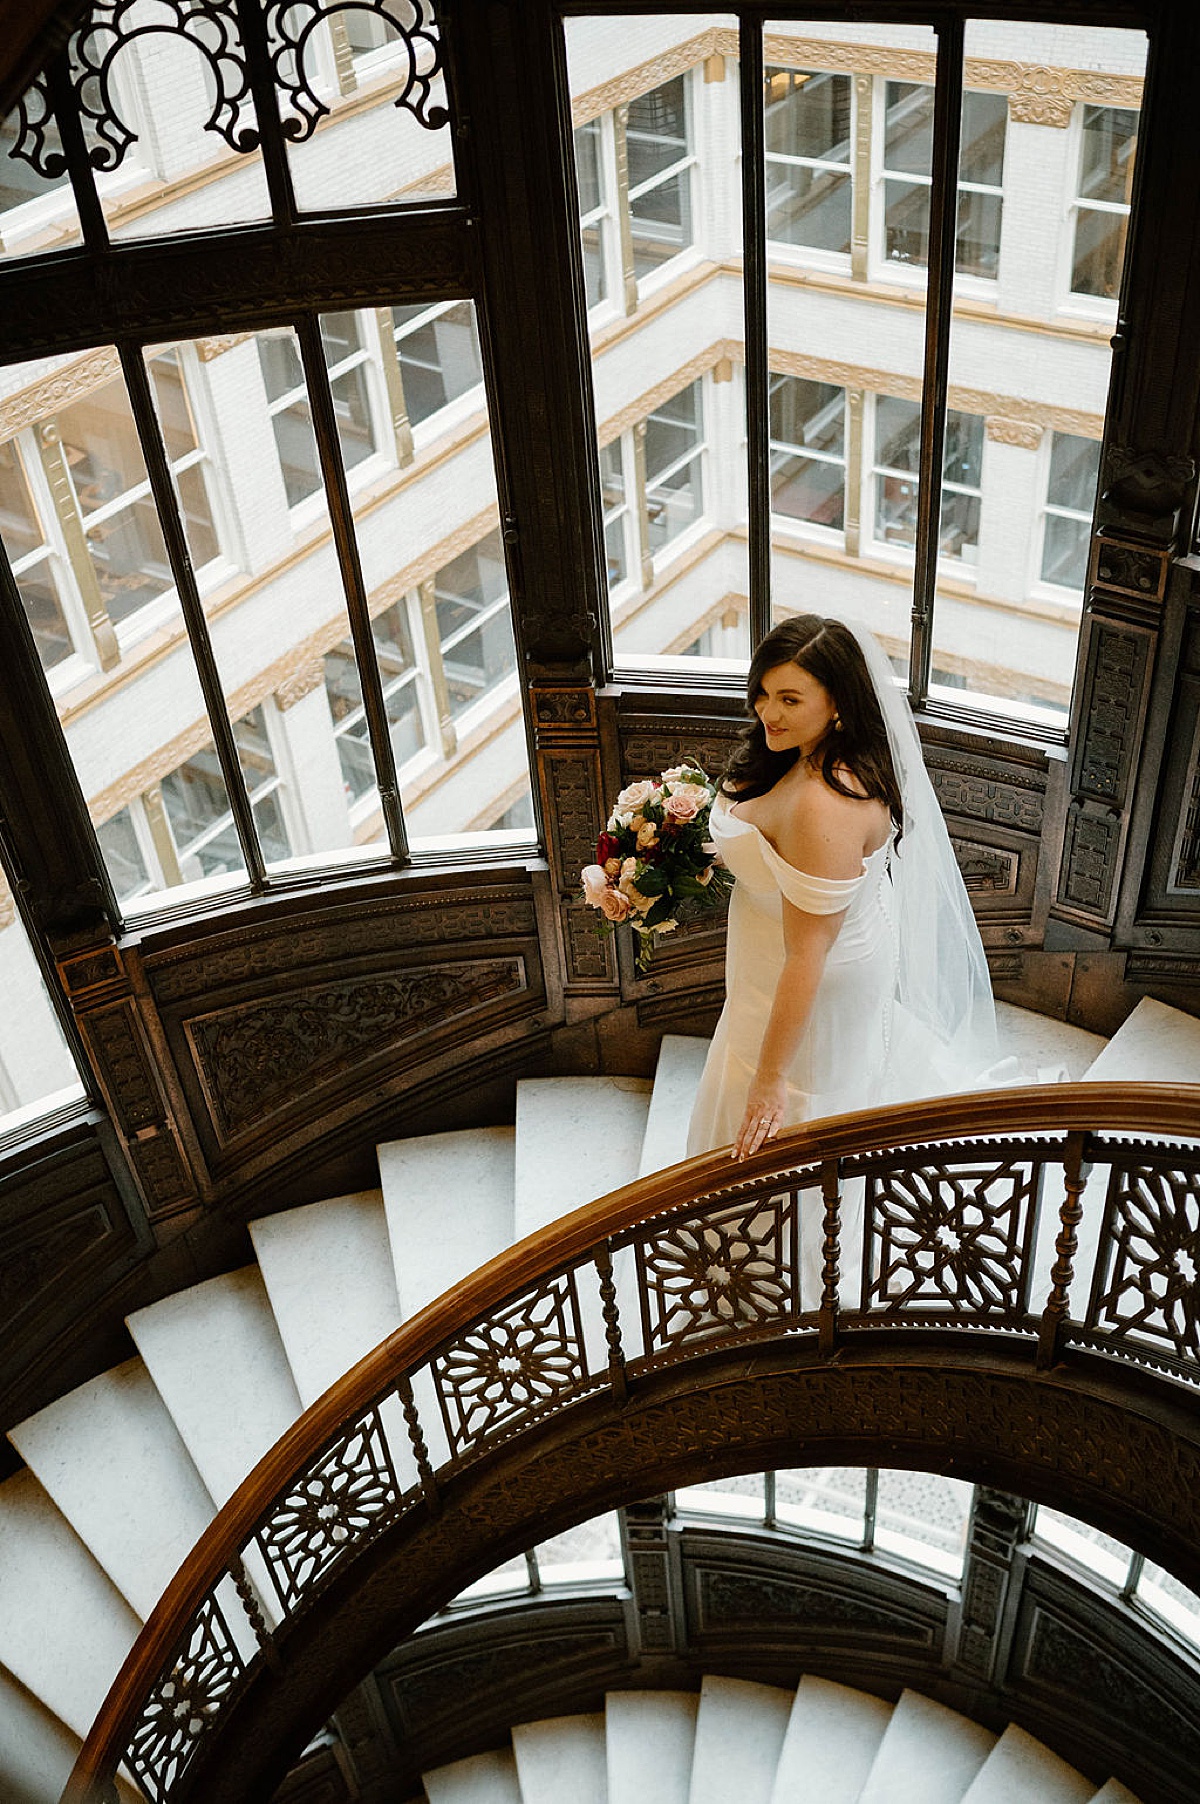 bride poses on circular stairway with windows overlooking Chicago shot by Indigo Lace Collective